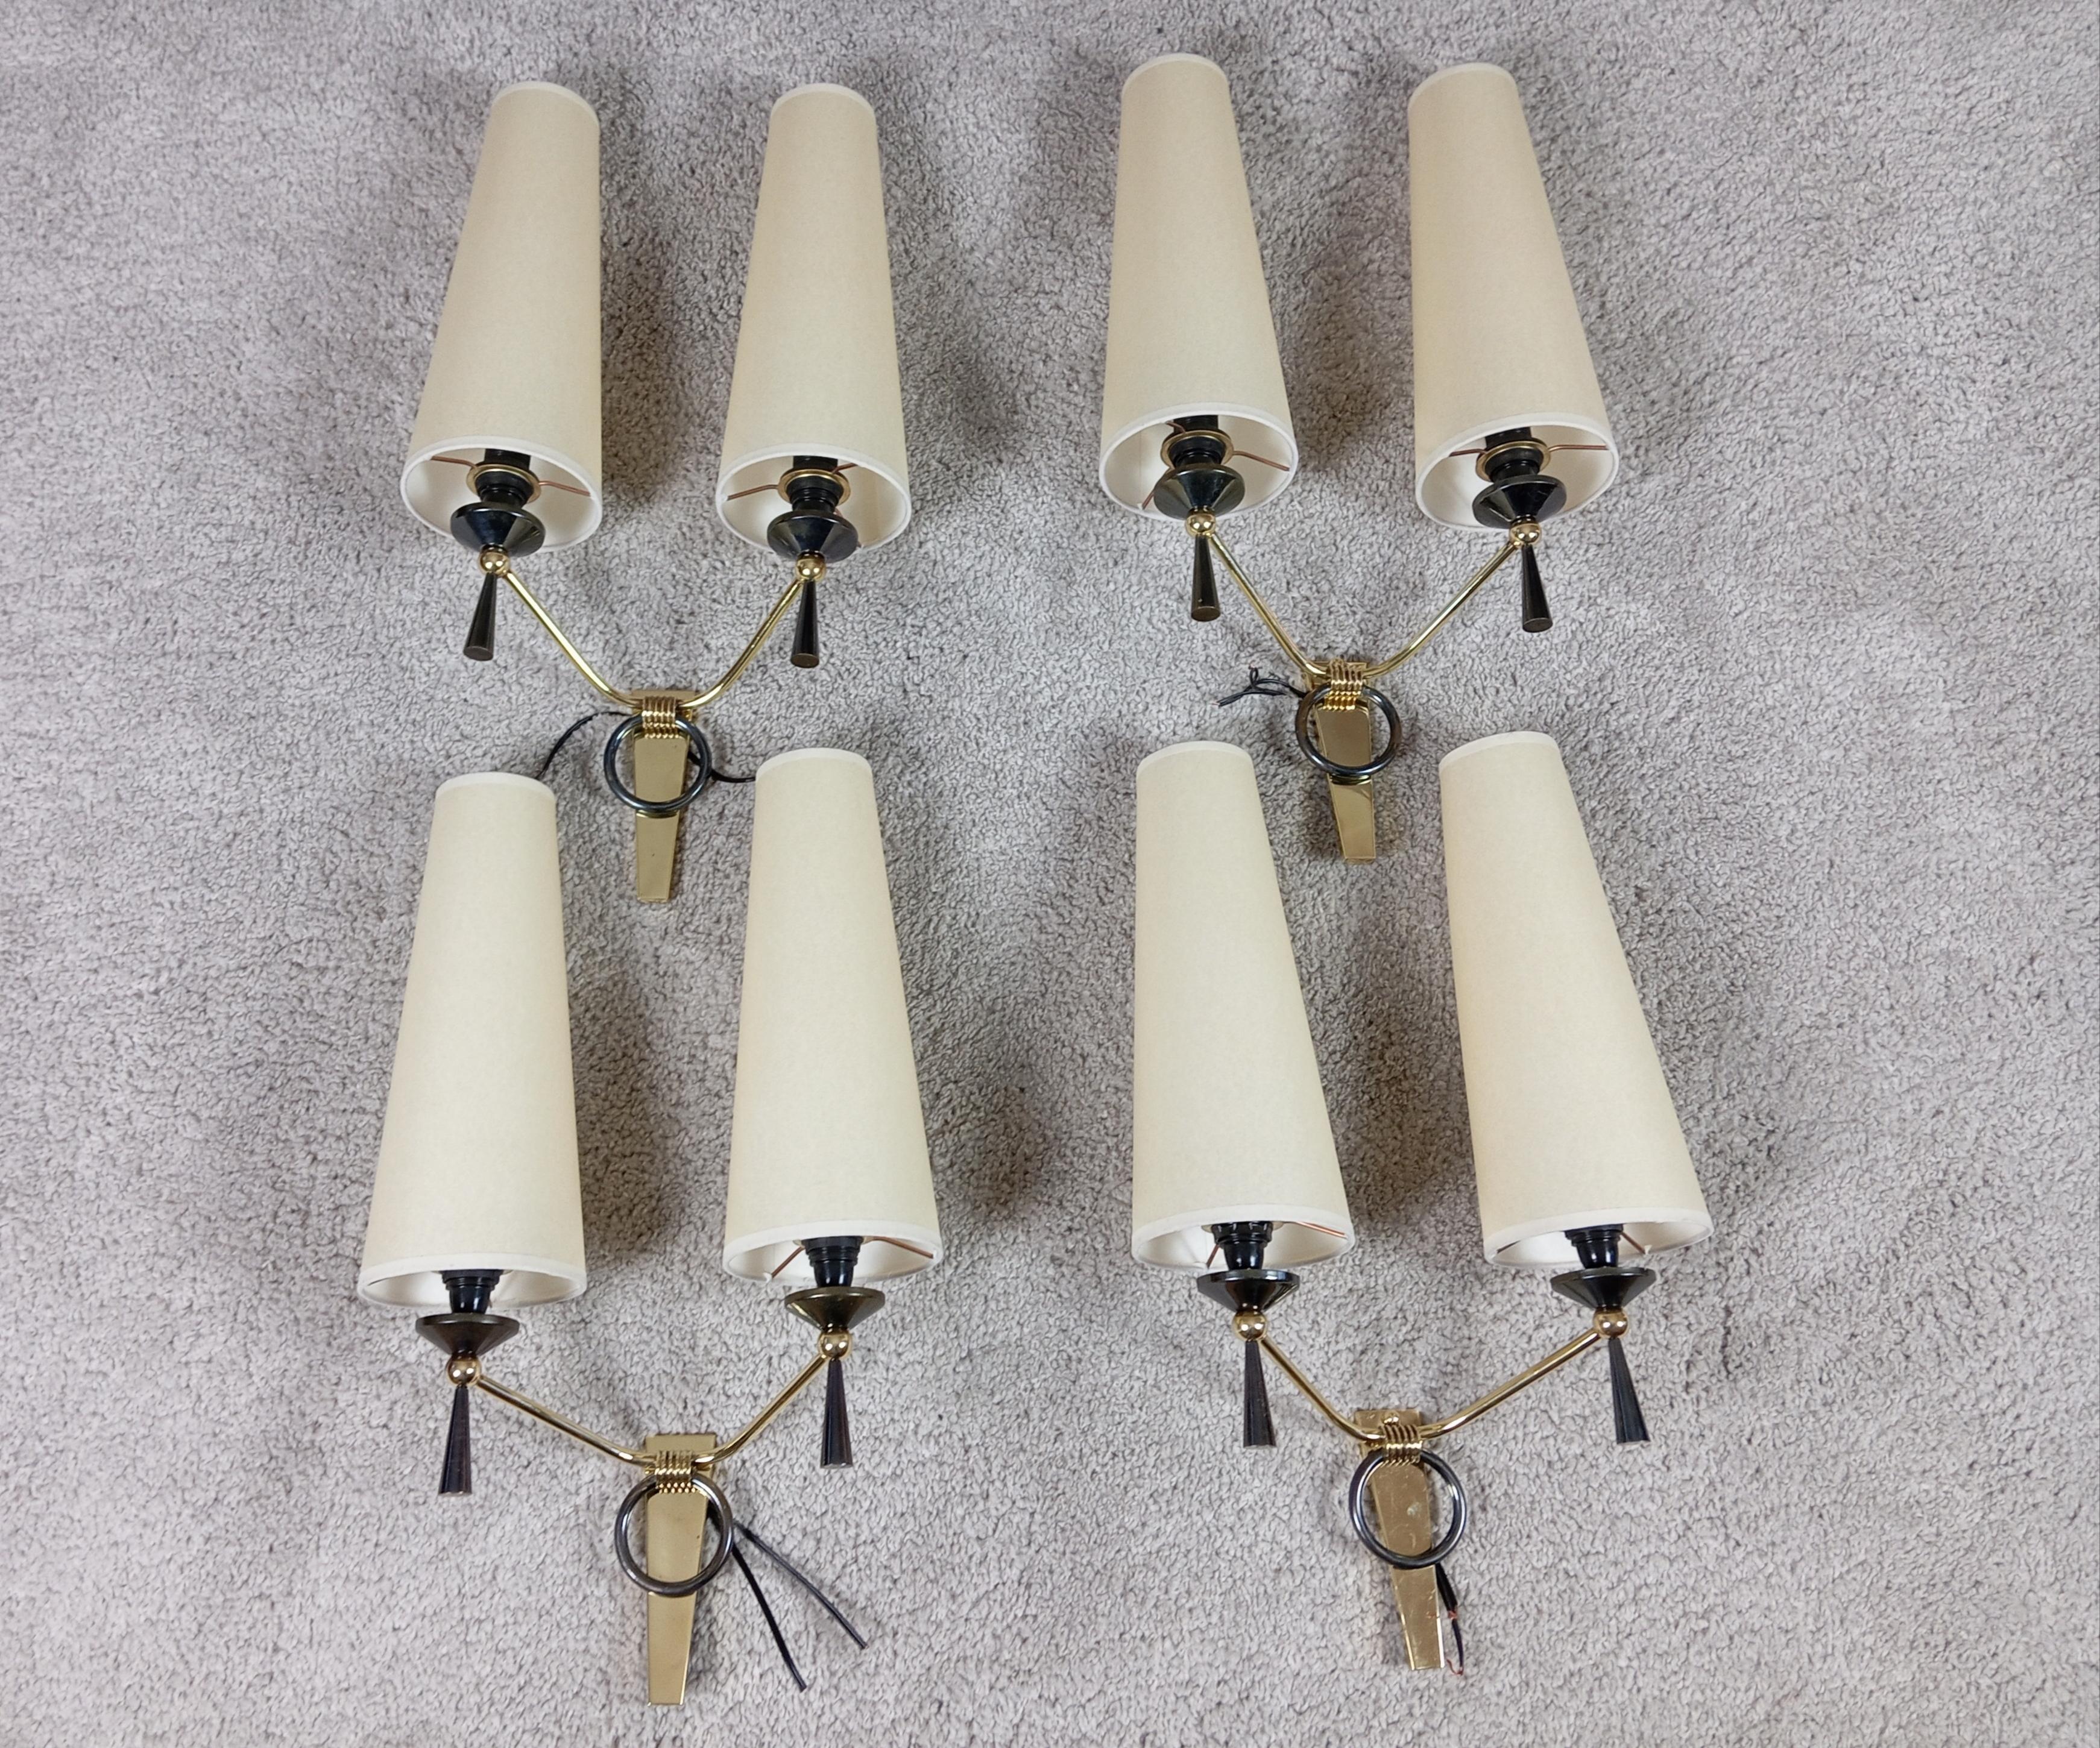 Series of 4 double-light sconces,
consisting of a rectangular base in solid brass, to which 2 brass and brass arms with gunmetal patina are attached.
These sconces have been restored, new wiring to EU standards, shade redone to model.
French work by